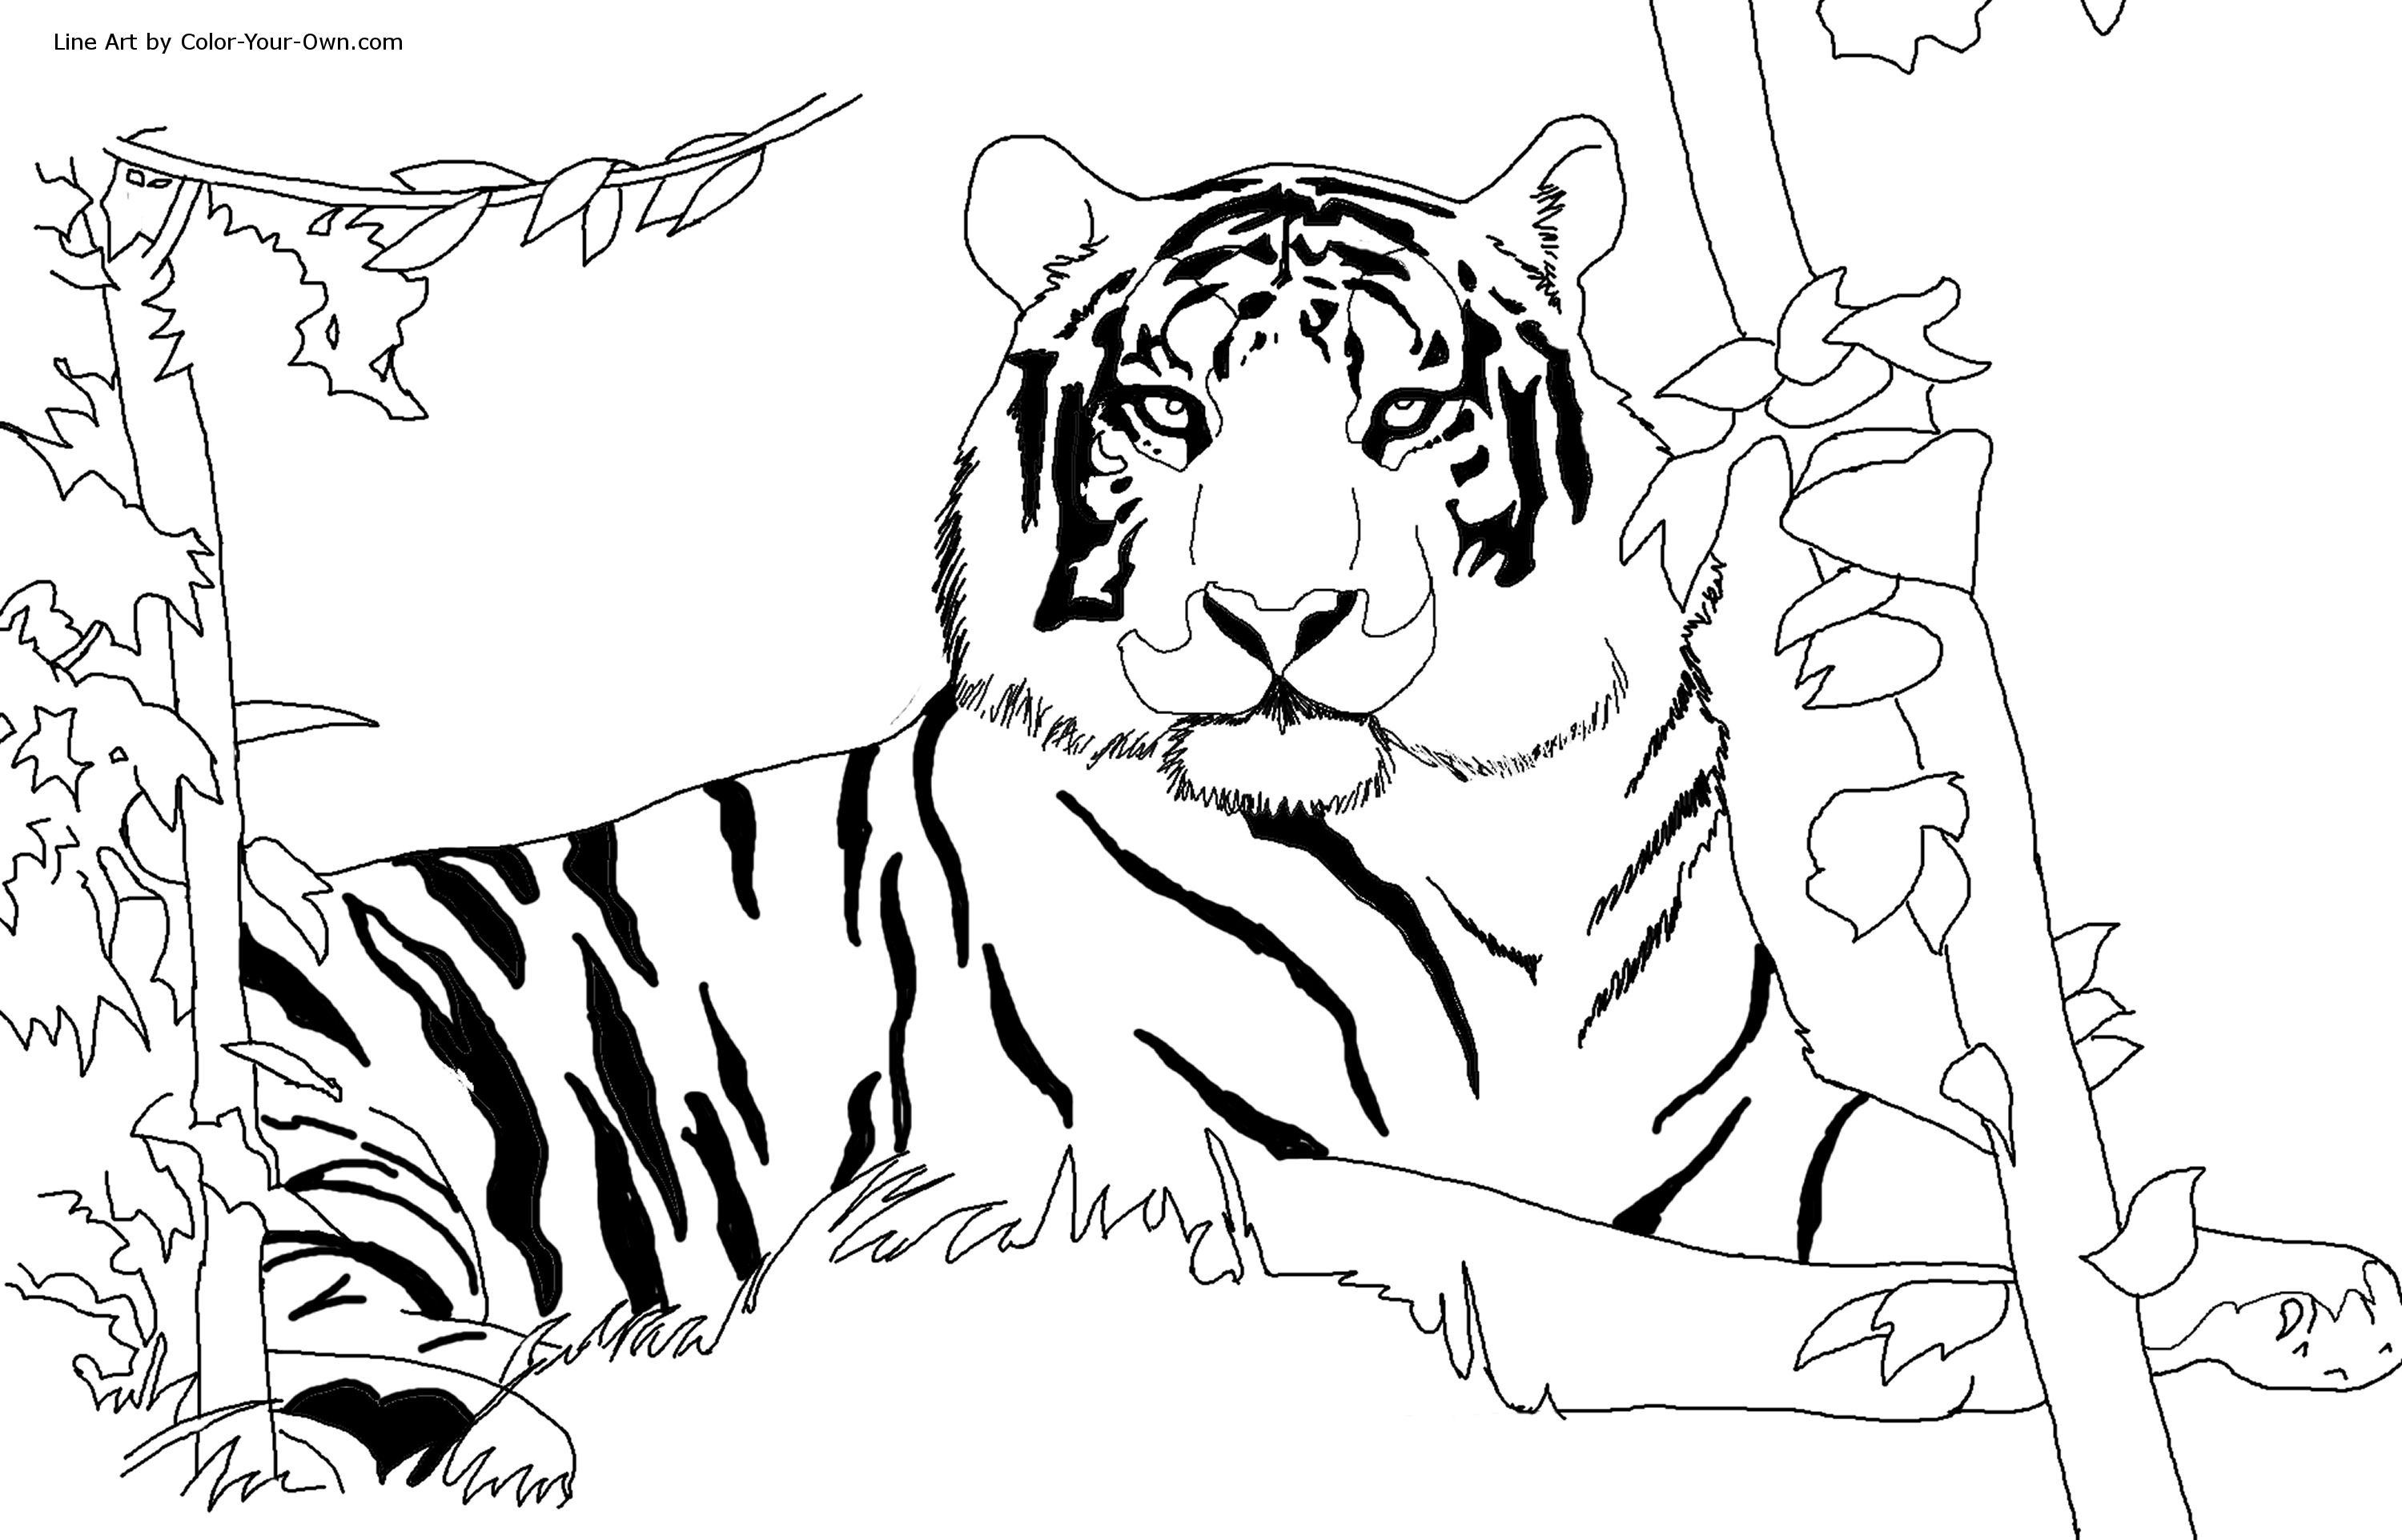 Tiger coloring pages to download and print for free